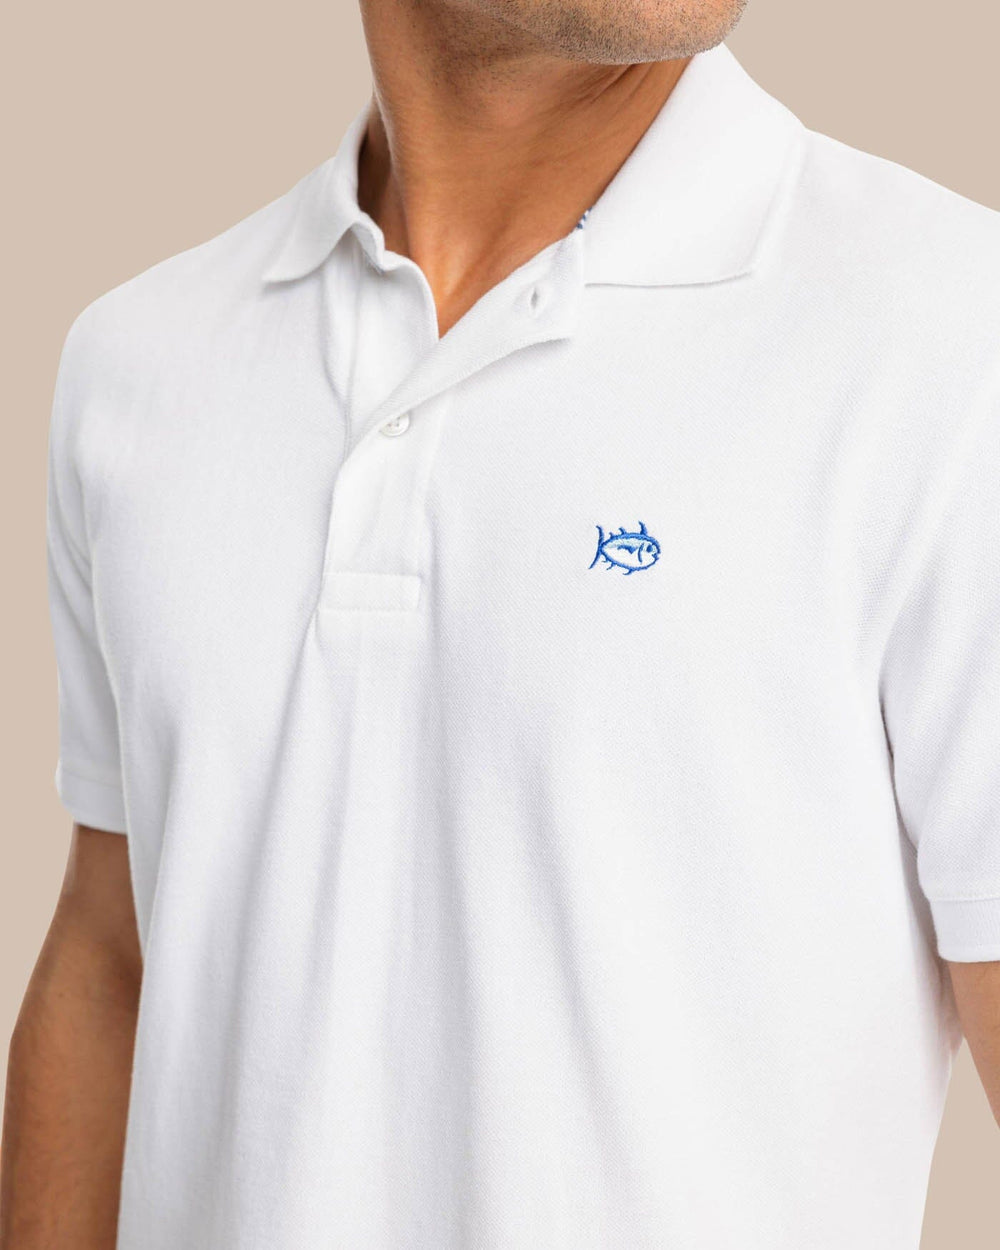 The model detail view of the Men's New Skipjack Polo Shirt by Southern Tide - Classic White